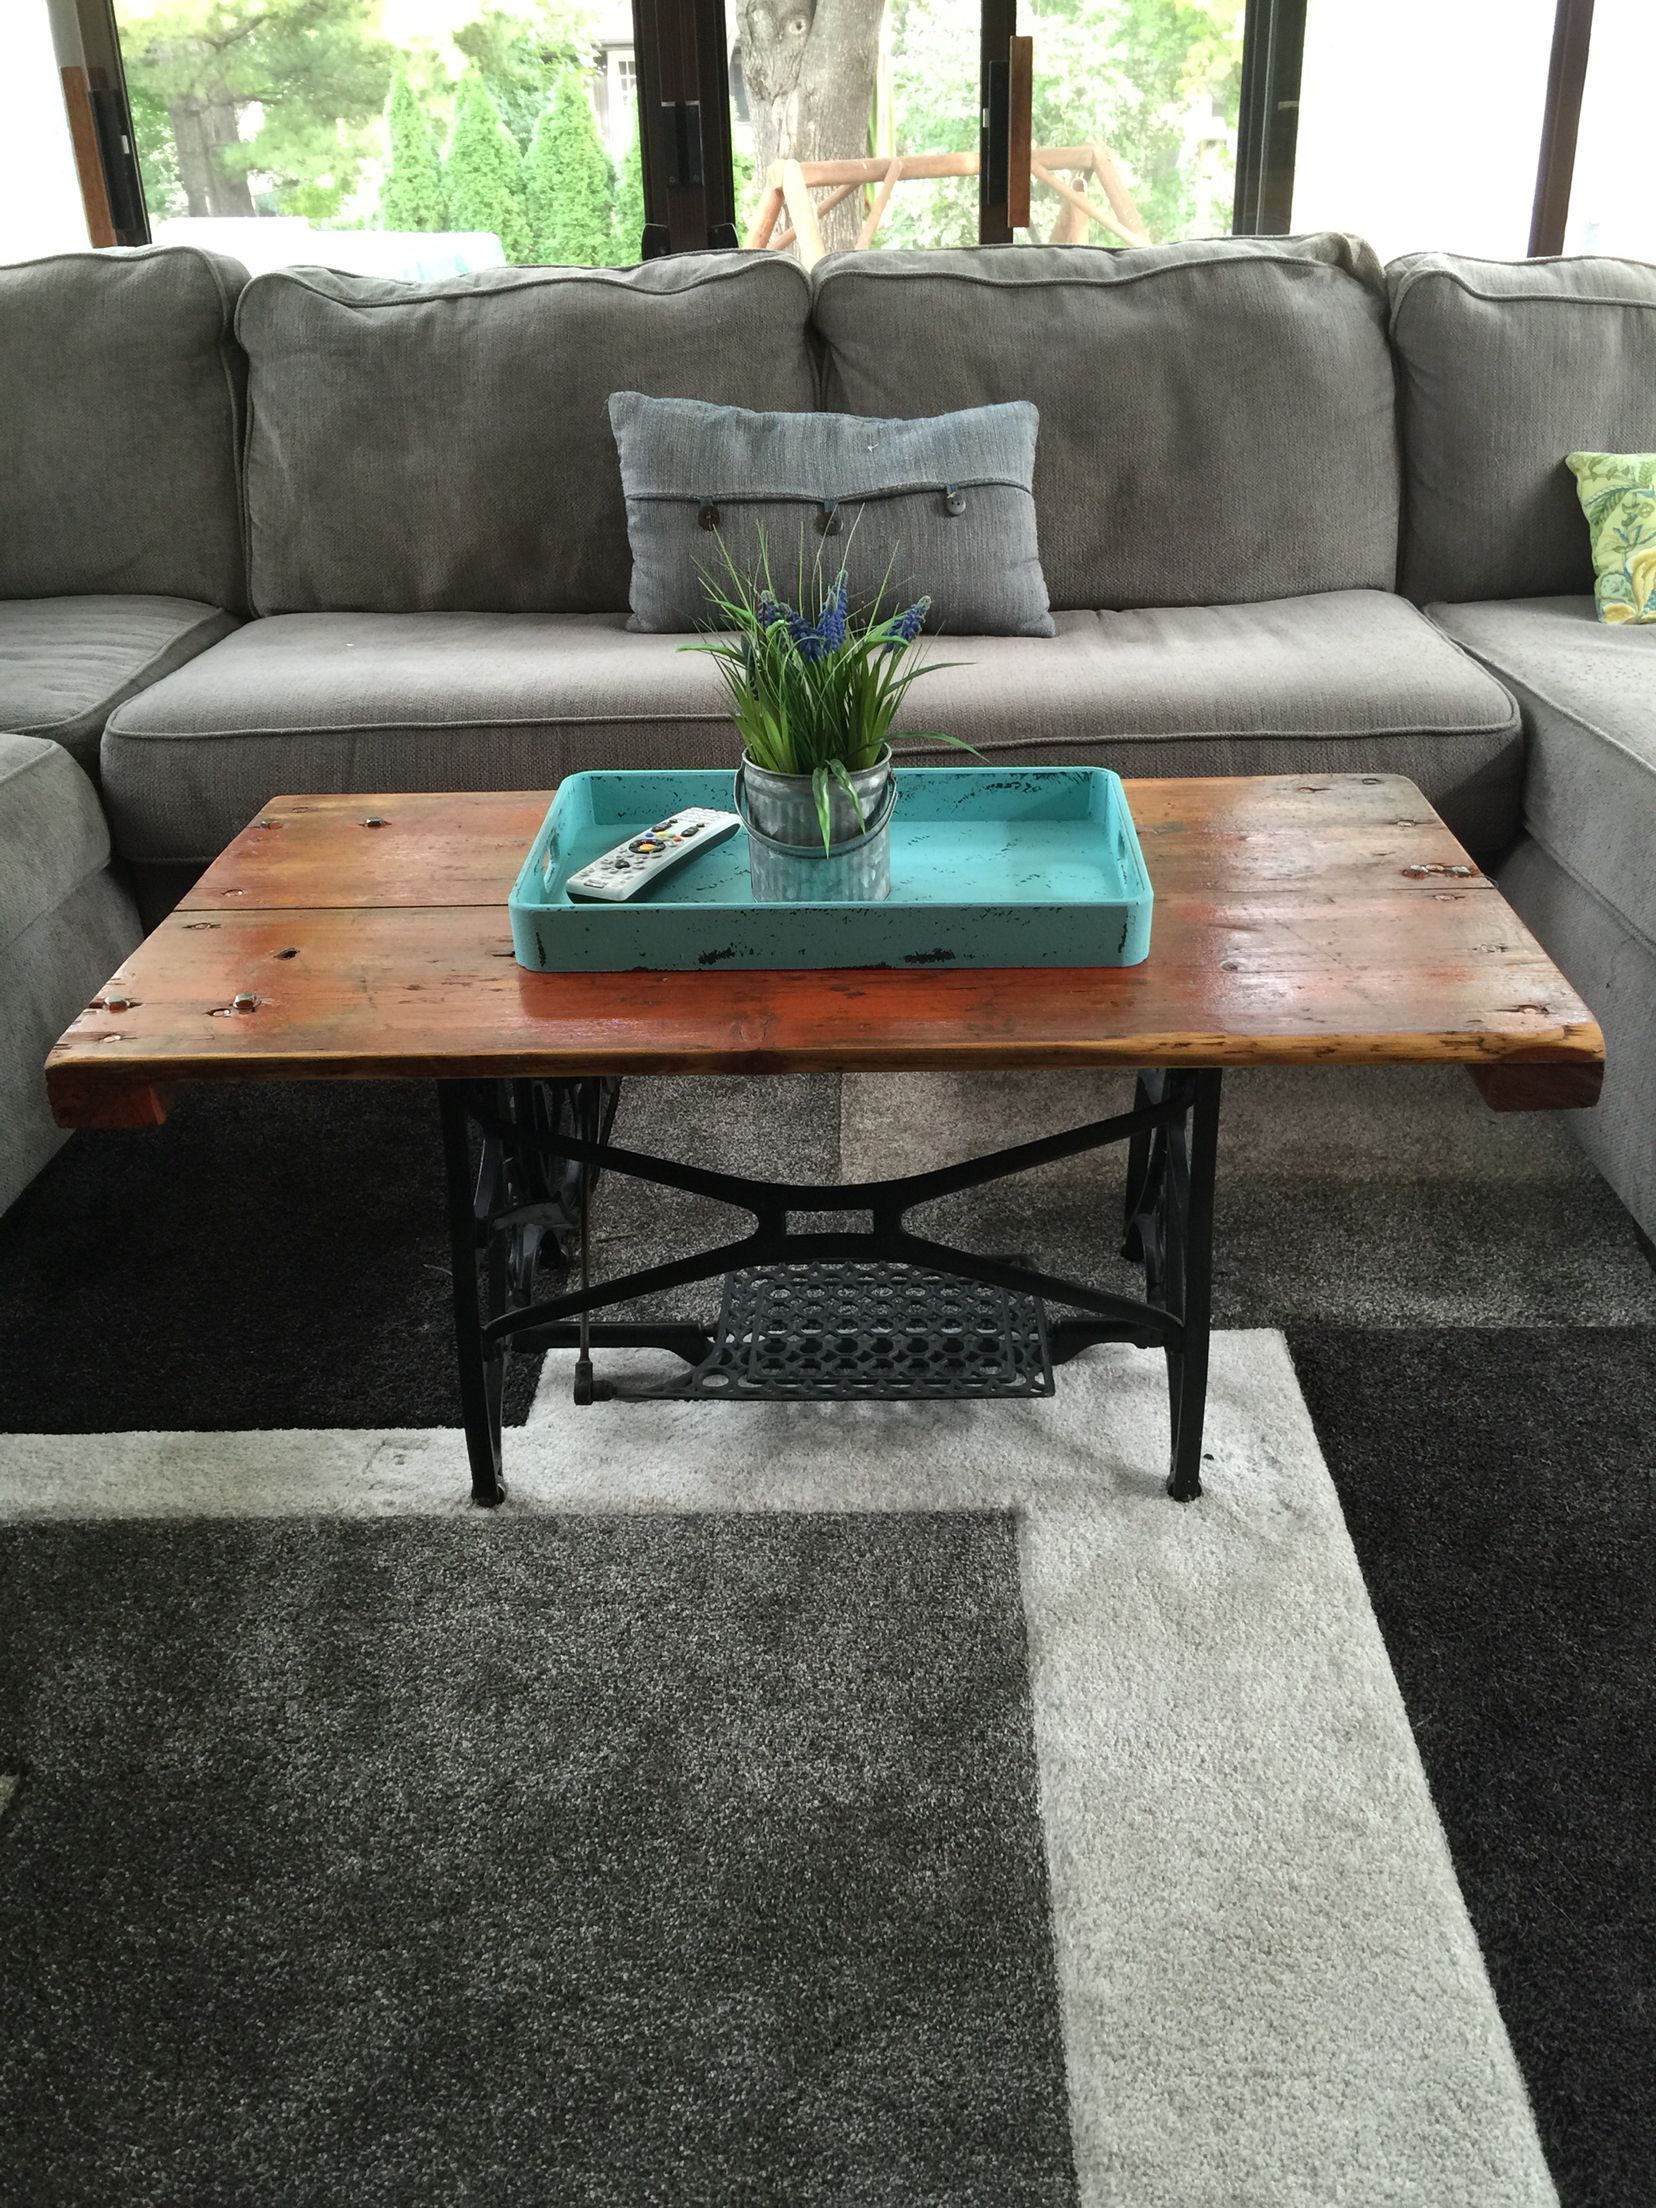 Coffee Table Made From Barn Door And Antique Sewing Machine Base Inside Coffee Tables With Storage And Barn Doors (View 9 of 20)